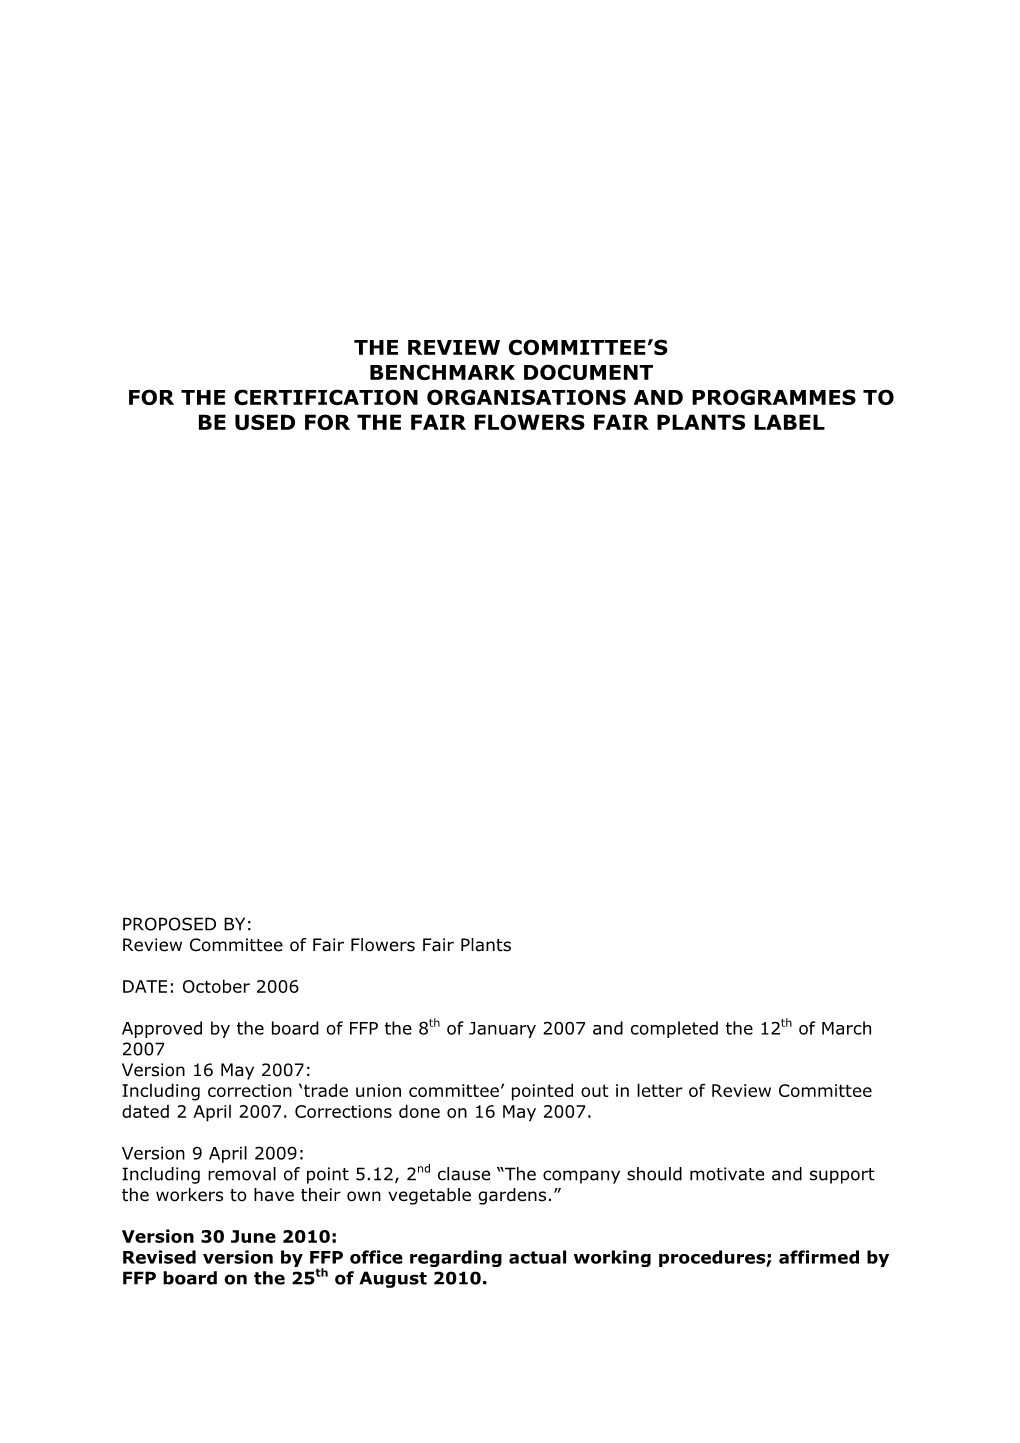 The Review Committee's Benchmark Document For